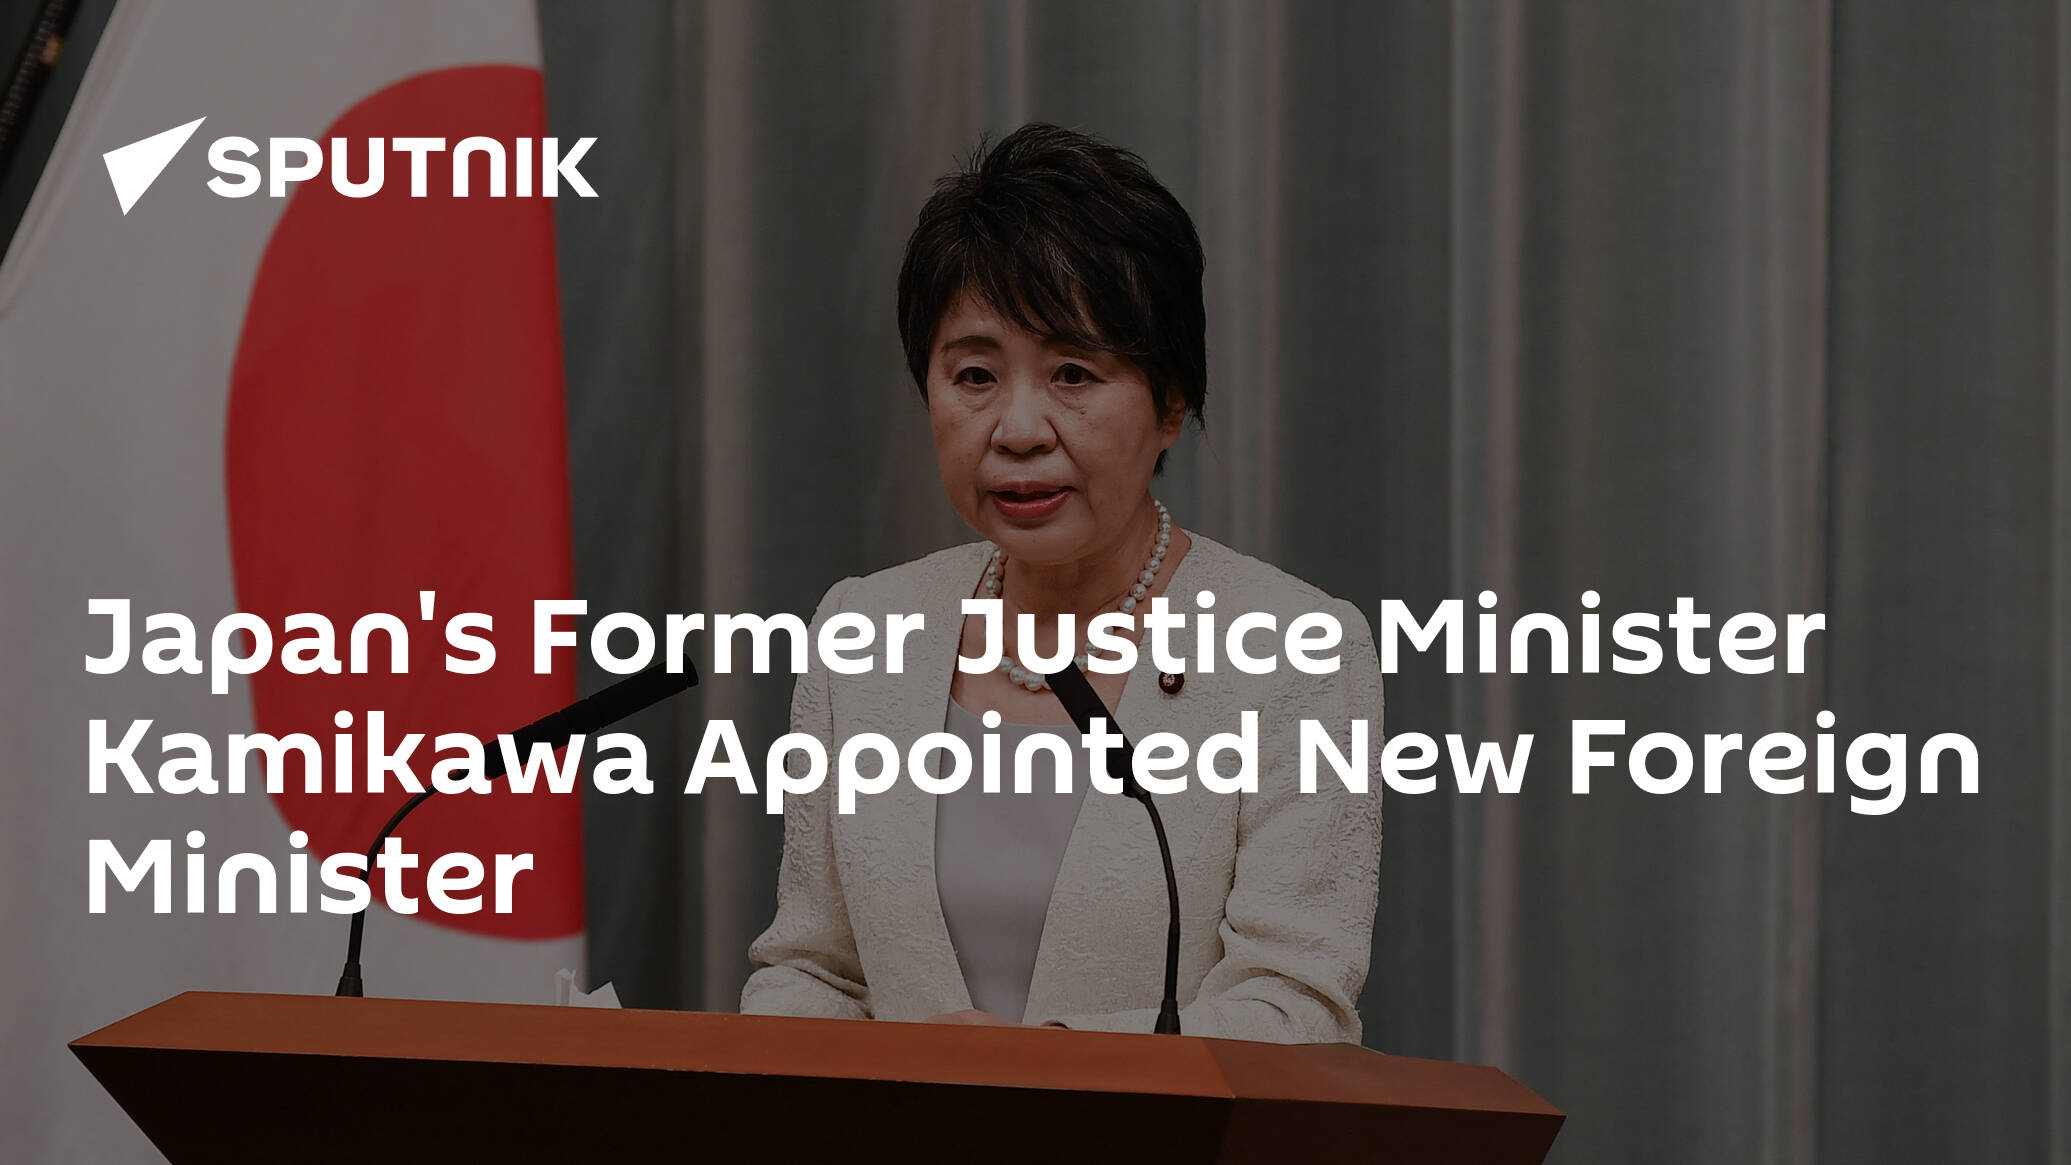 Japan's Former Justice Minister Kamikawa Appointed New Foreign Minister